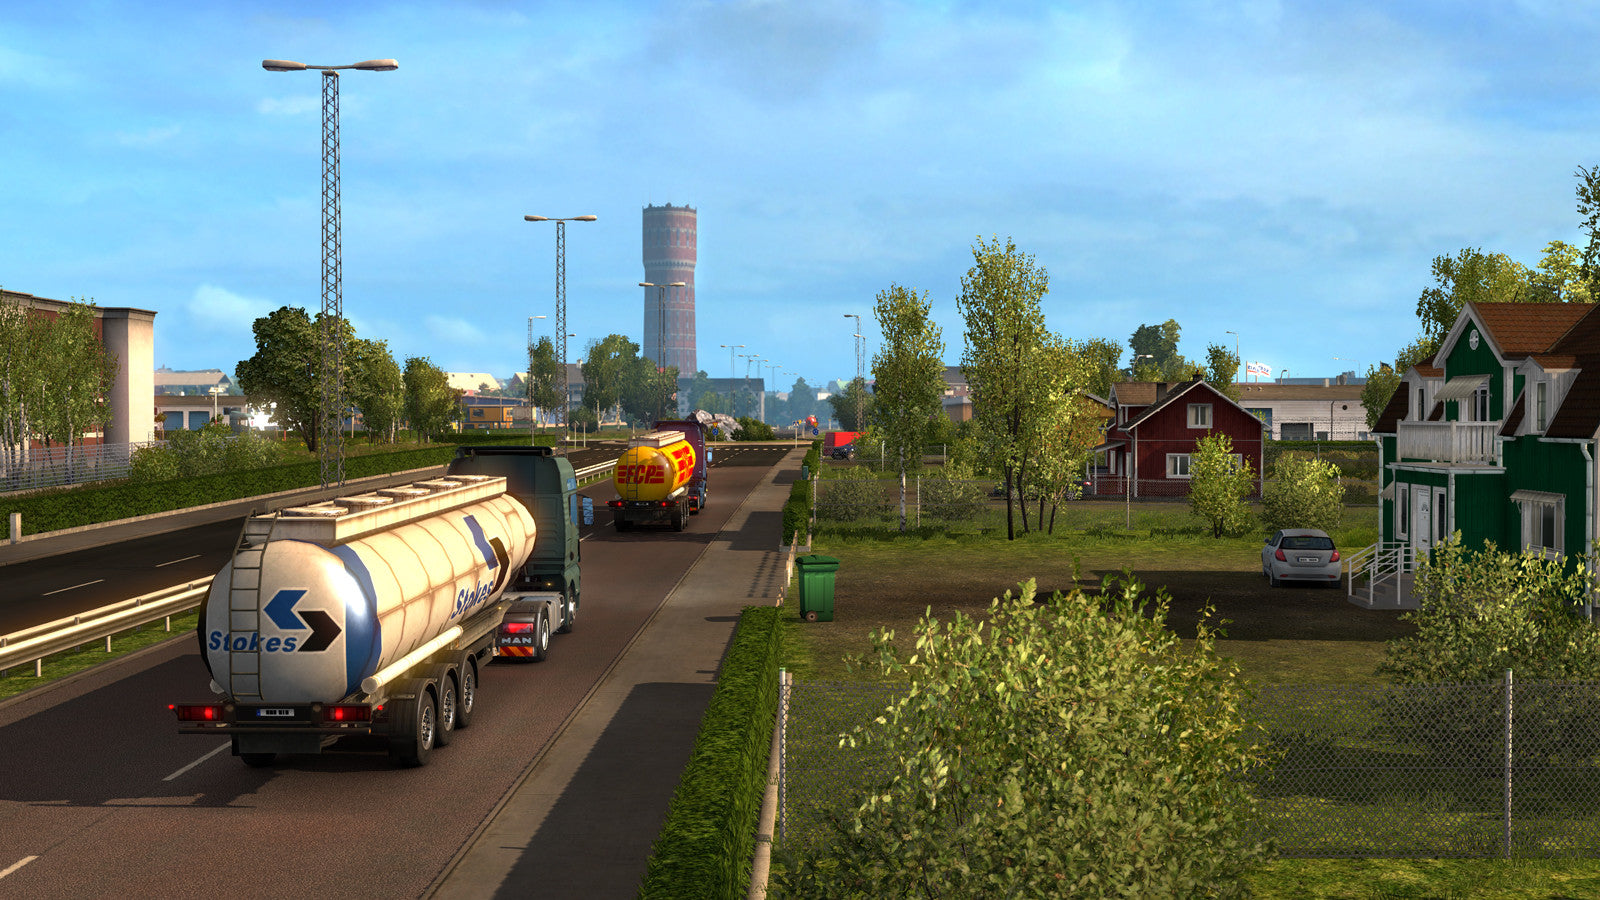 Euro Truck Simulator 2 - Scandinavia at the most competitive